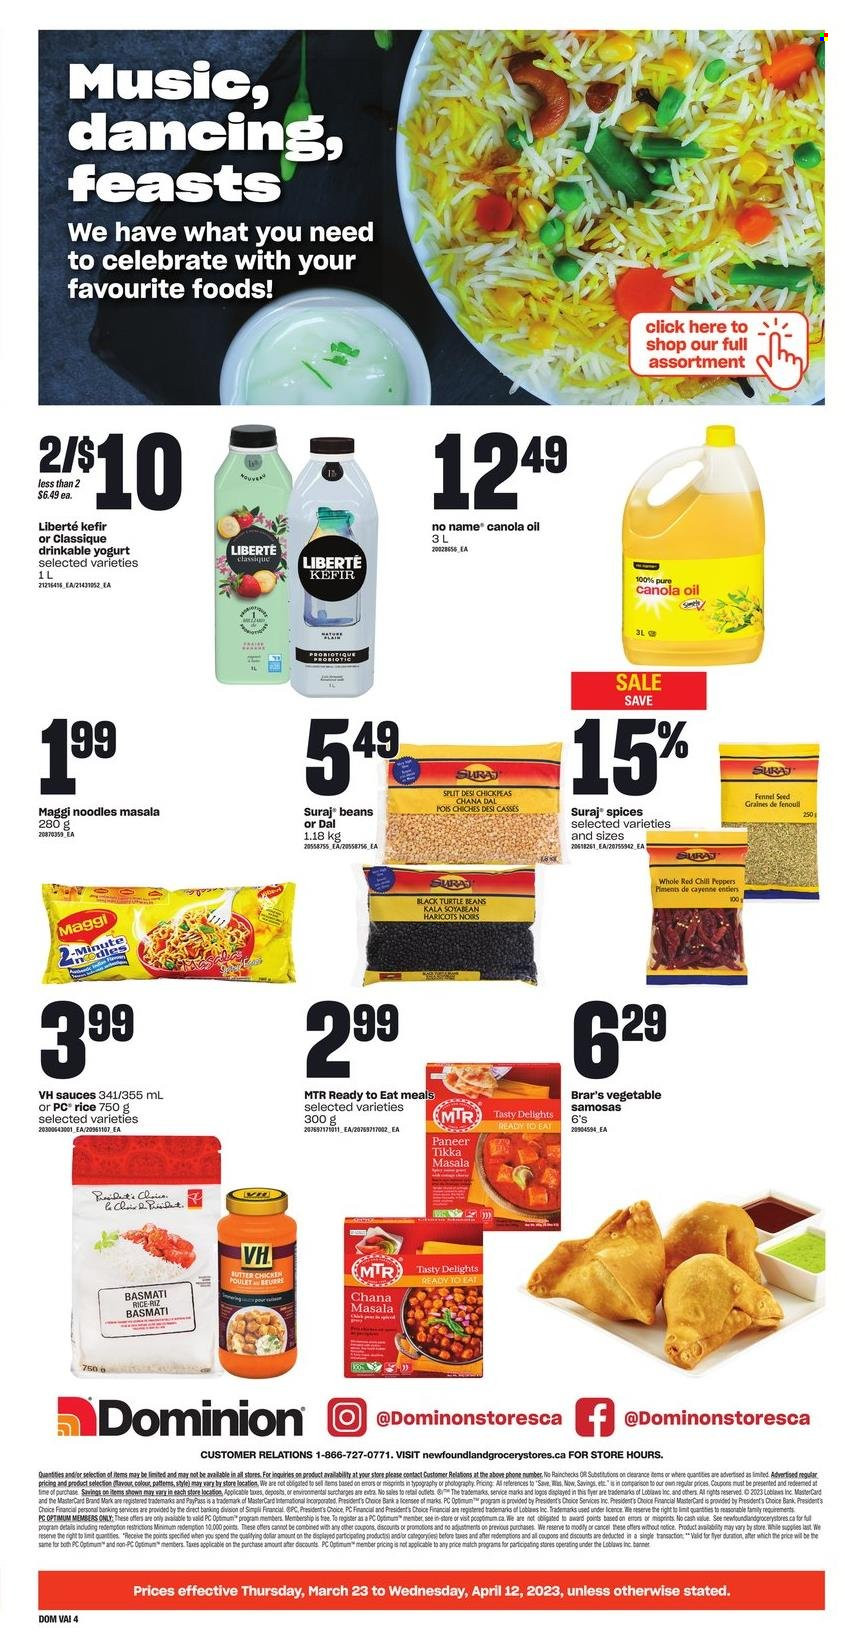 thumbnail - Dominion Flyer - March 23, 2023 - April 12, 2023 - Sales products - beans, chili peppers, No Name, MTR, noodles, Tikka Masala, paneer, yoghurt, kefir, Maggi, basmati rice, rice, chickpeas, chana dal, fennel, canola oil, oil, chicken, Optimum, plant seeds. Page 4.